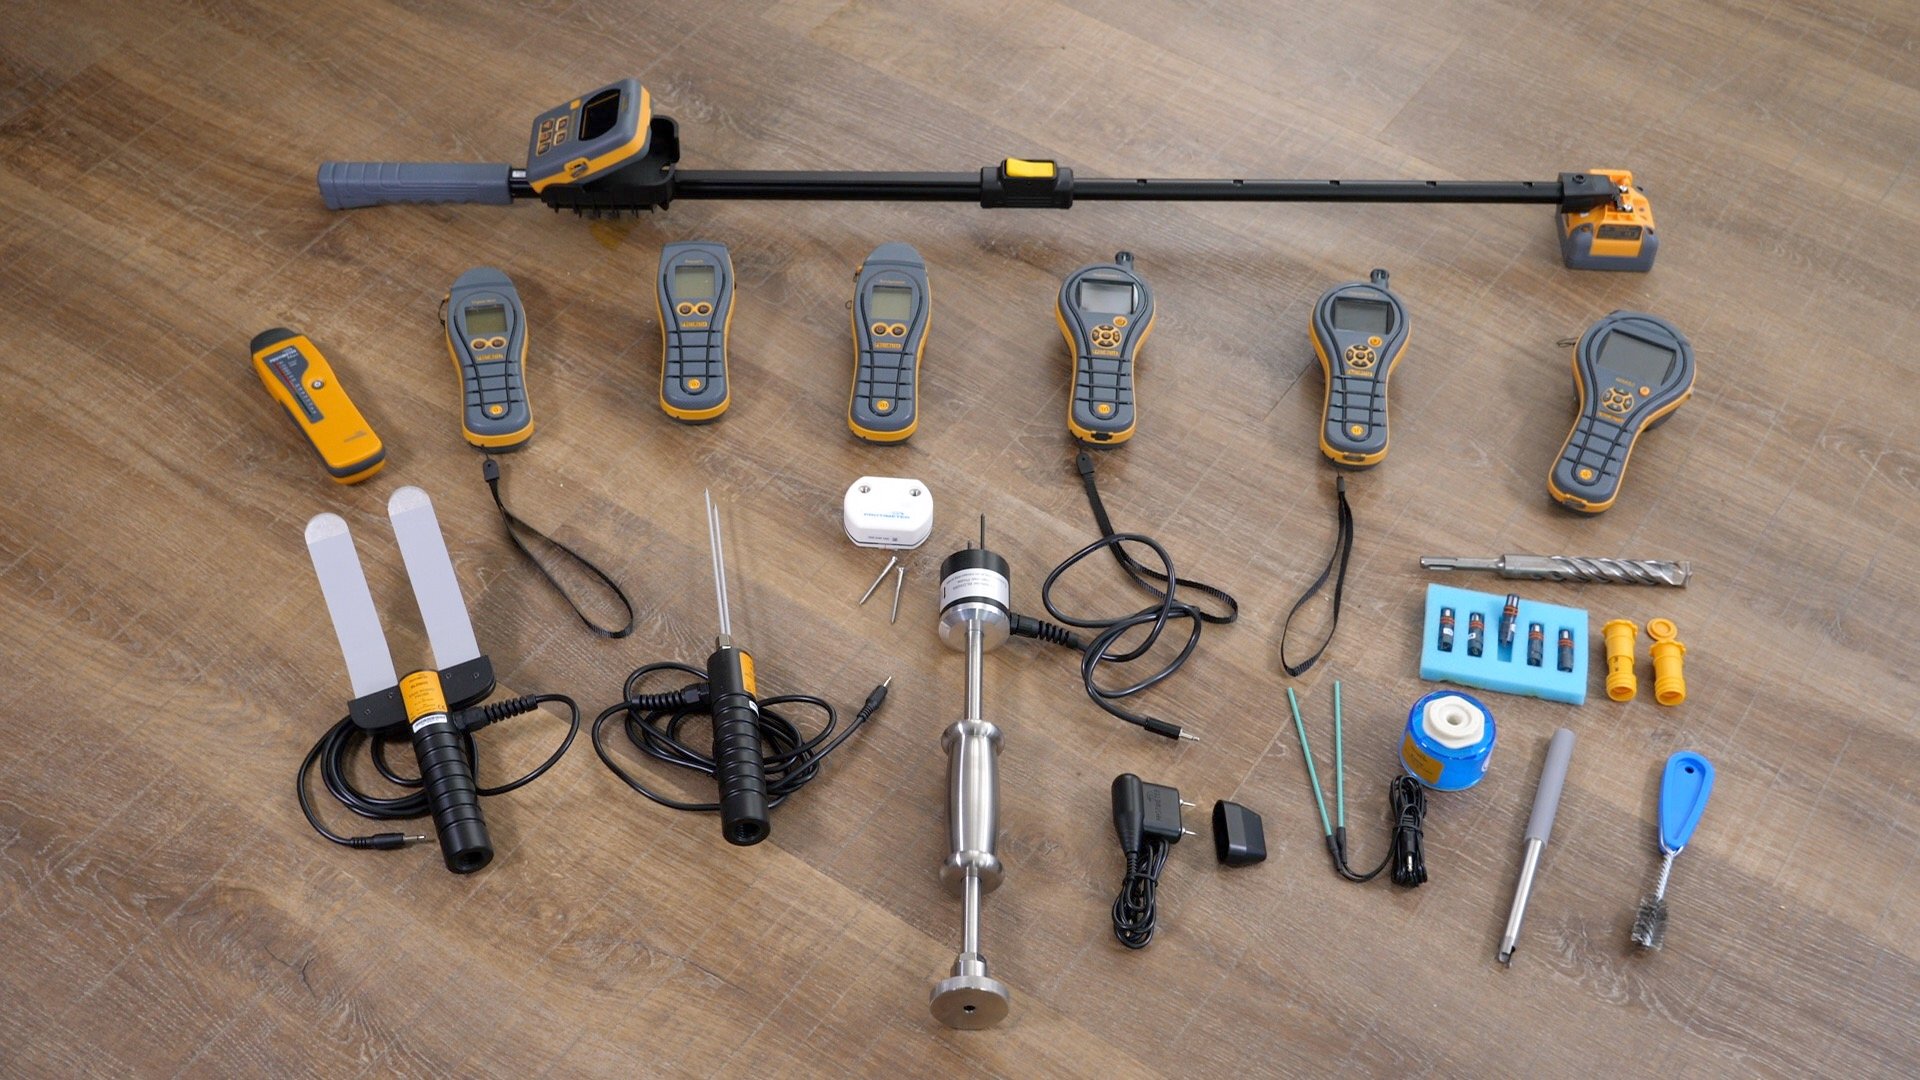 Damp Testing Equipment Every Home Inspector Needs in Their Toolkit